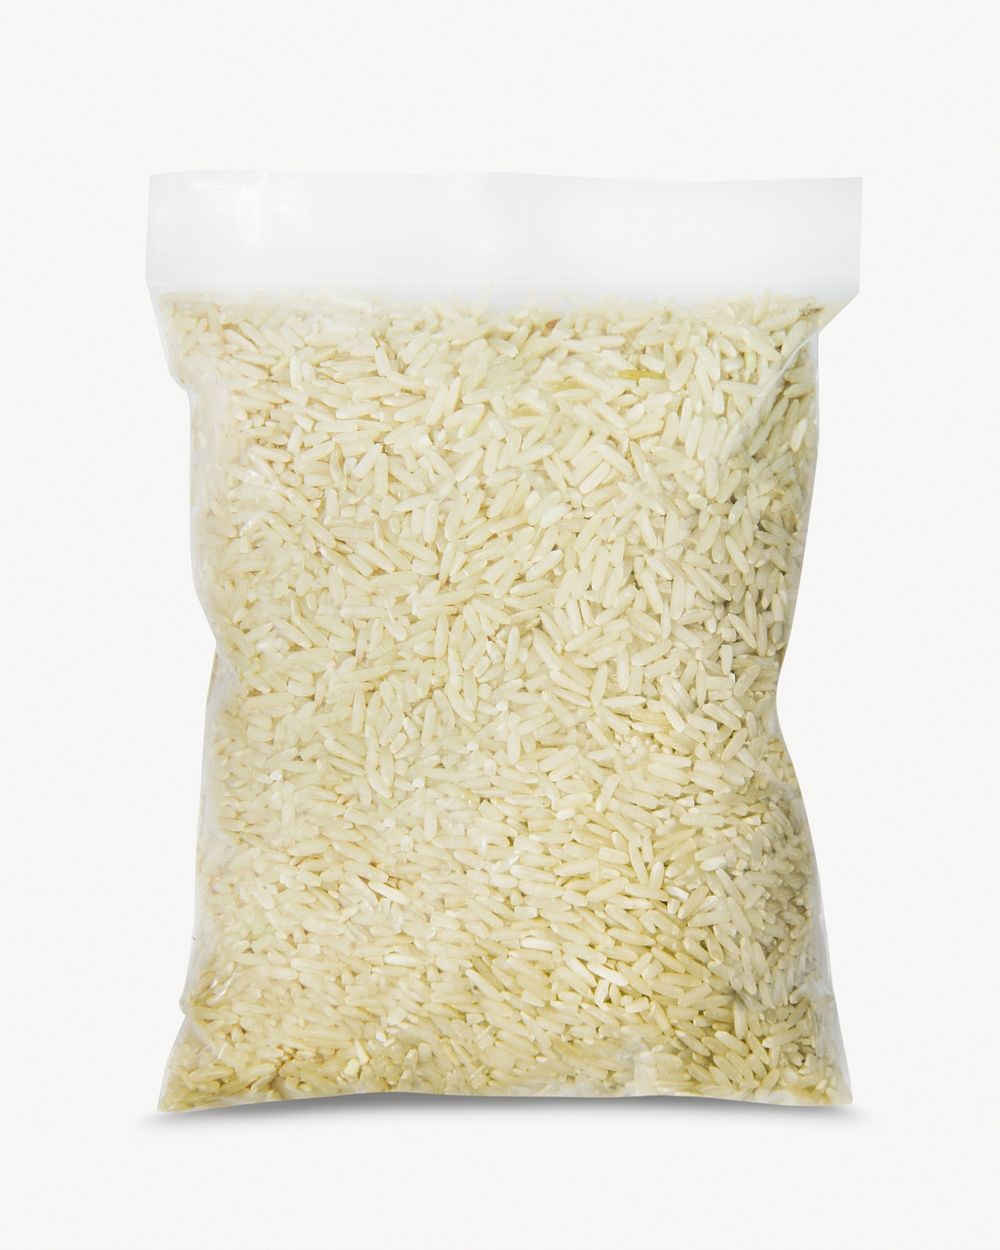 Bag of rice, isolated food image